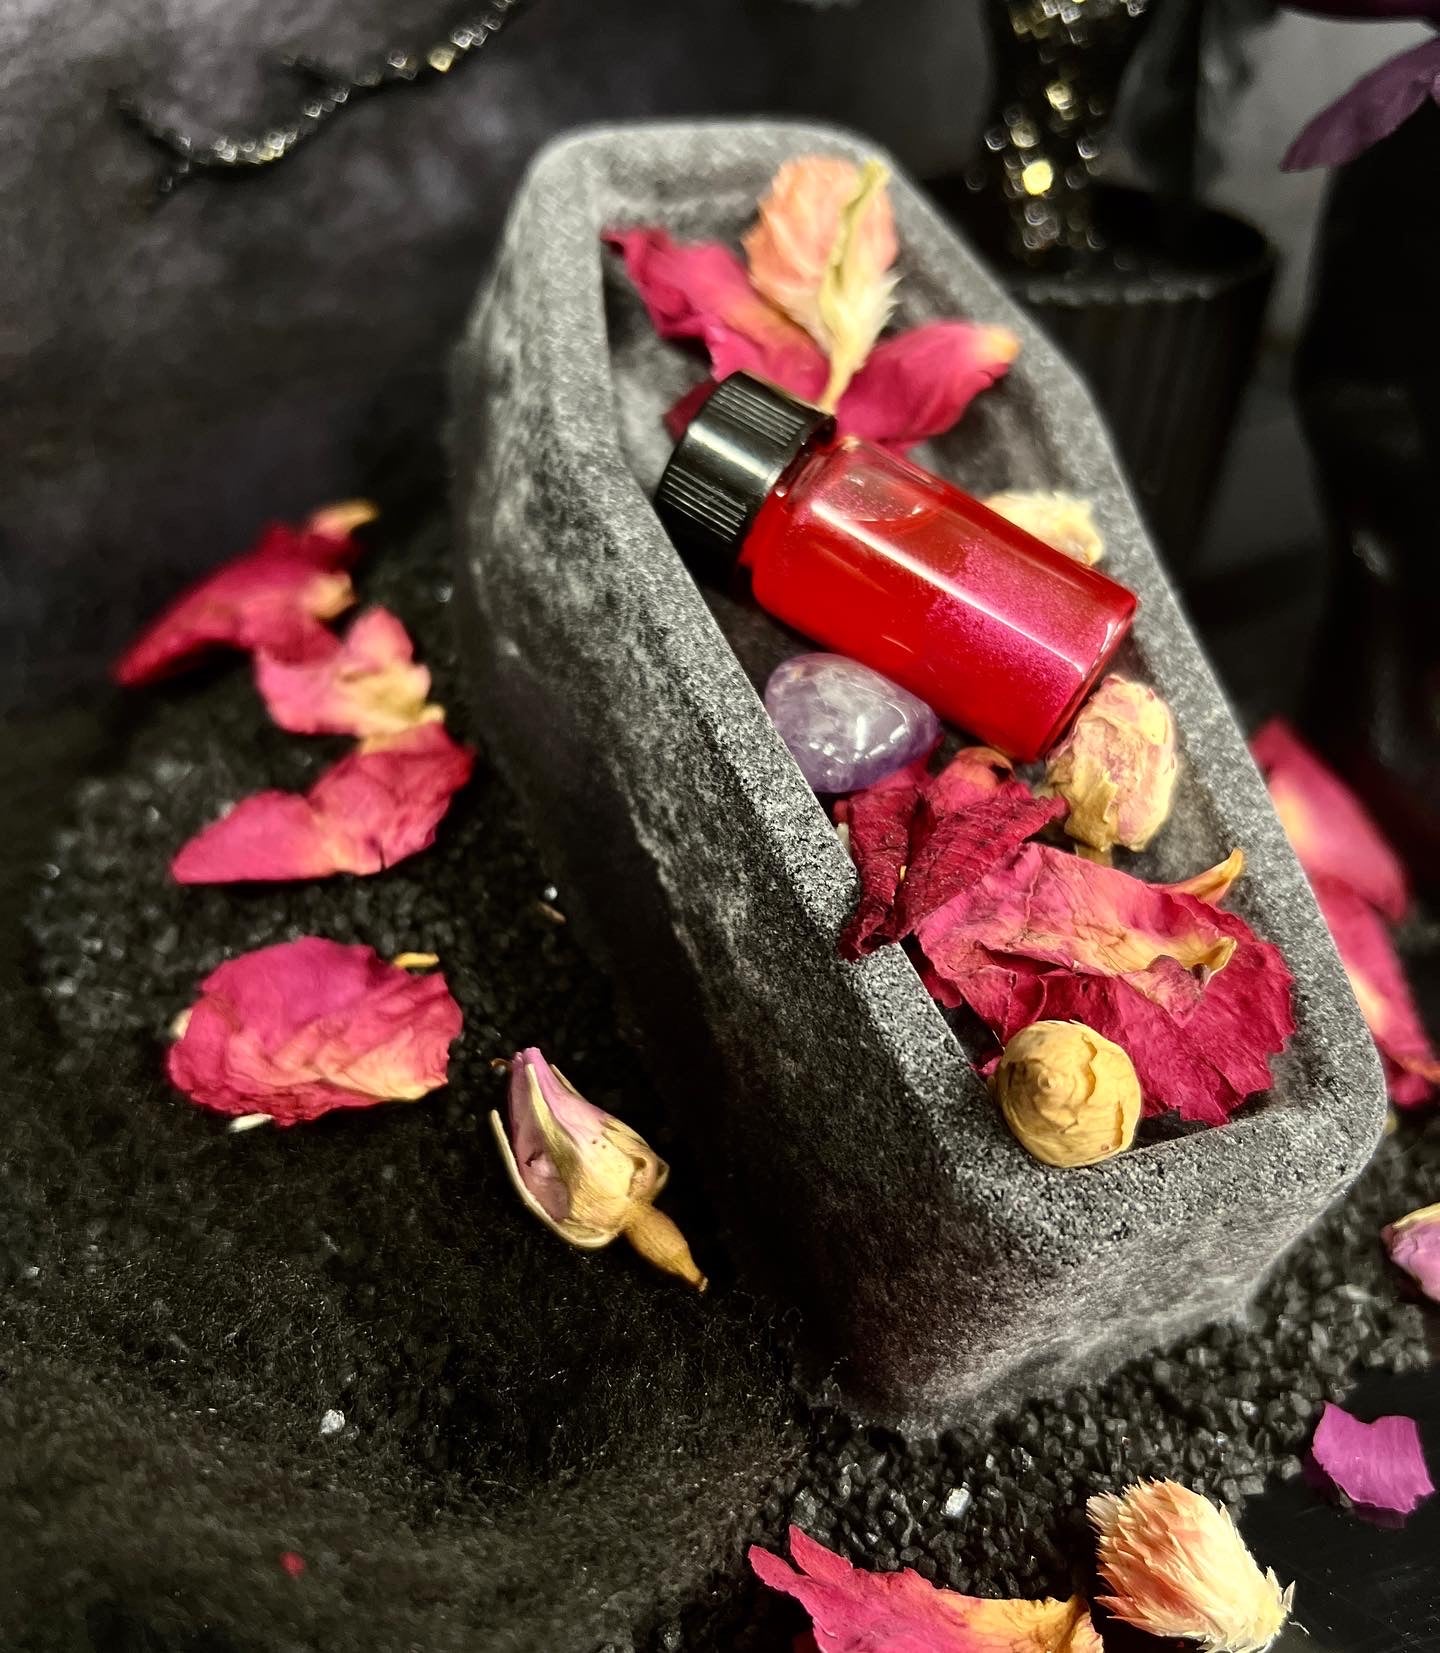 one cauffin shaped bath bomb laying down with rose petals and small vial of pink oil and purple amethyst stone 